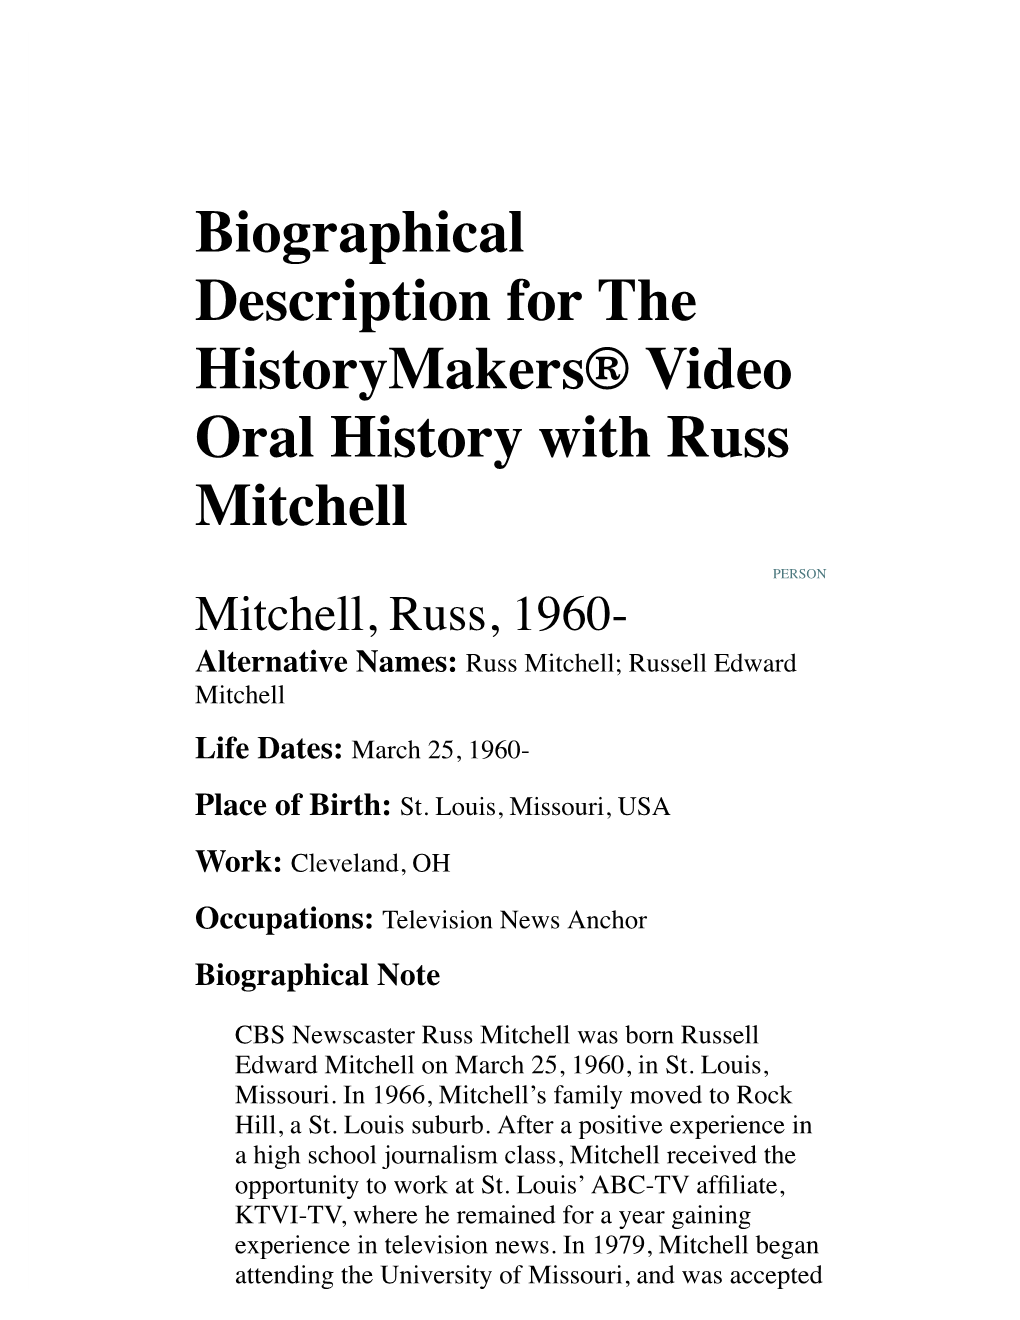 Biographical Description for the Historymakers® Video Oral History with Russ Mitchell